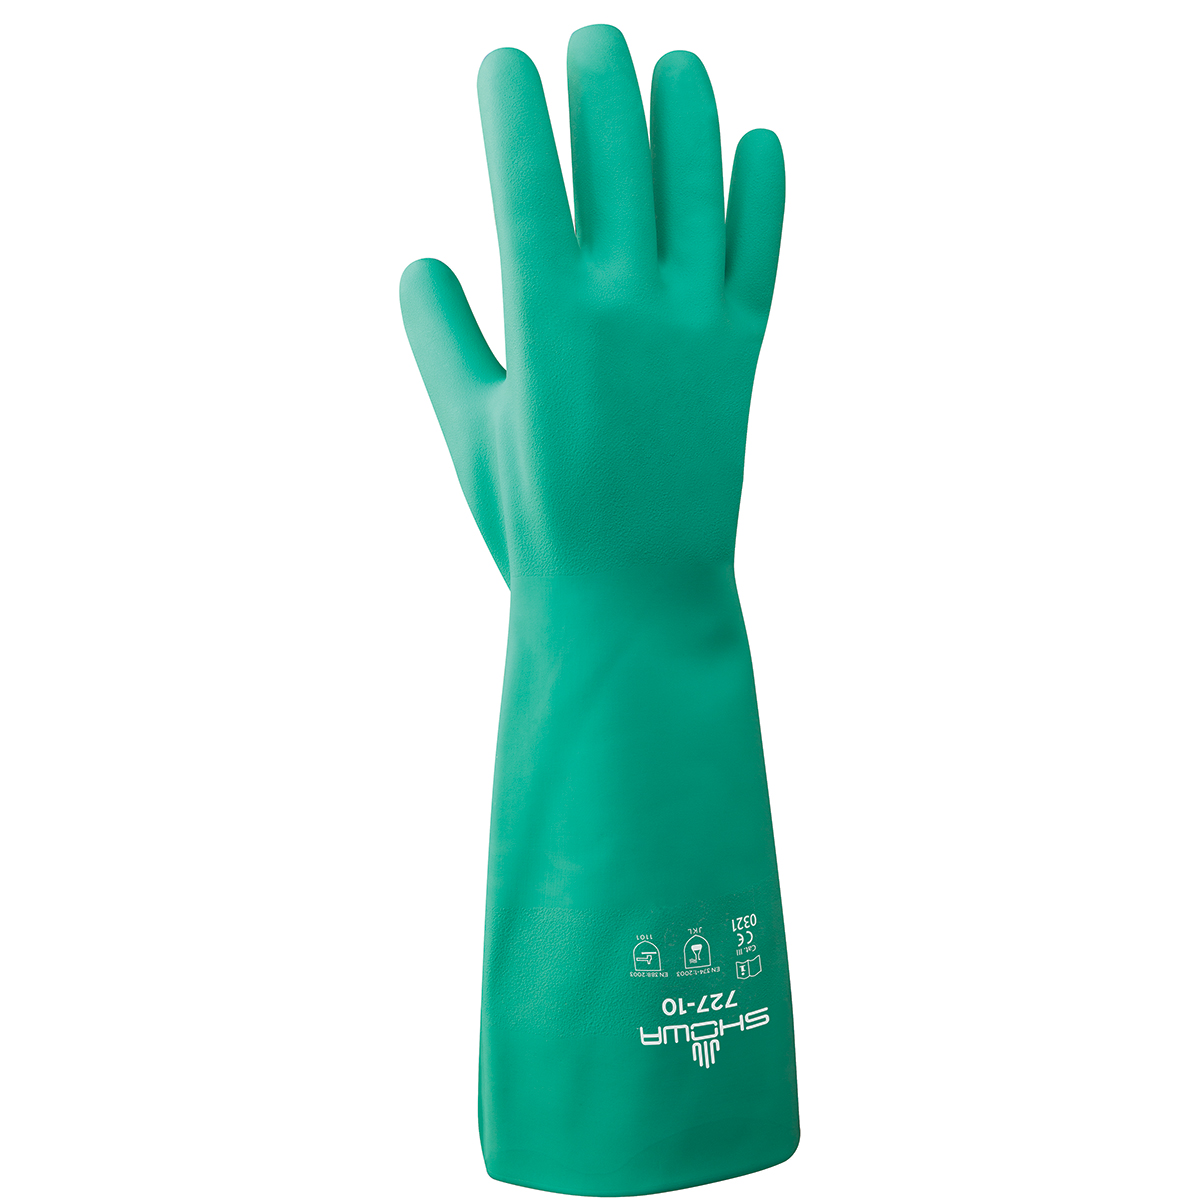 Chemical resistant unsupported nitrile, 13", 15-mil, light green, bisque finish, unlined, extra-extra large